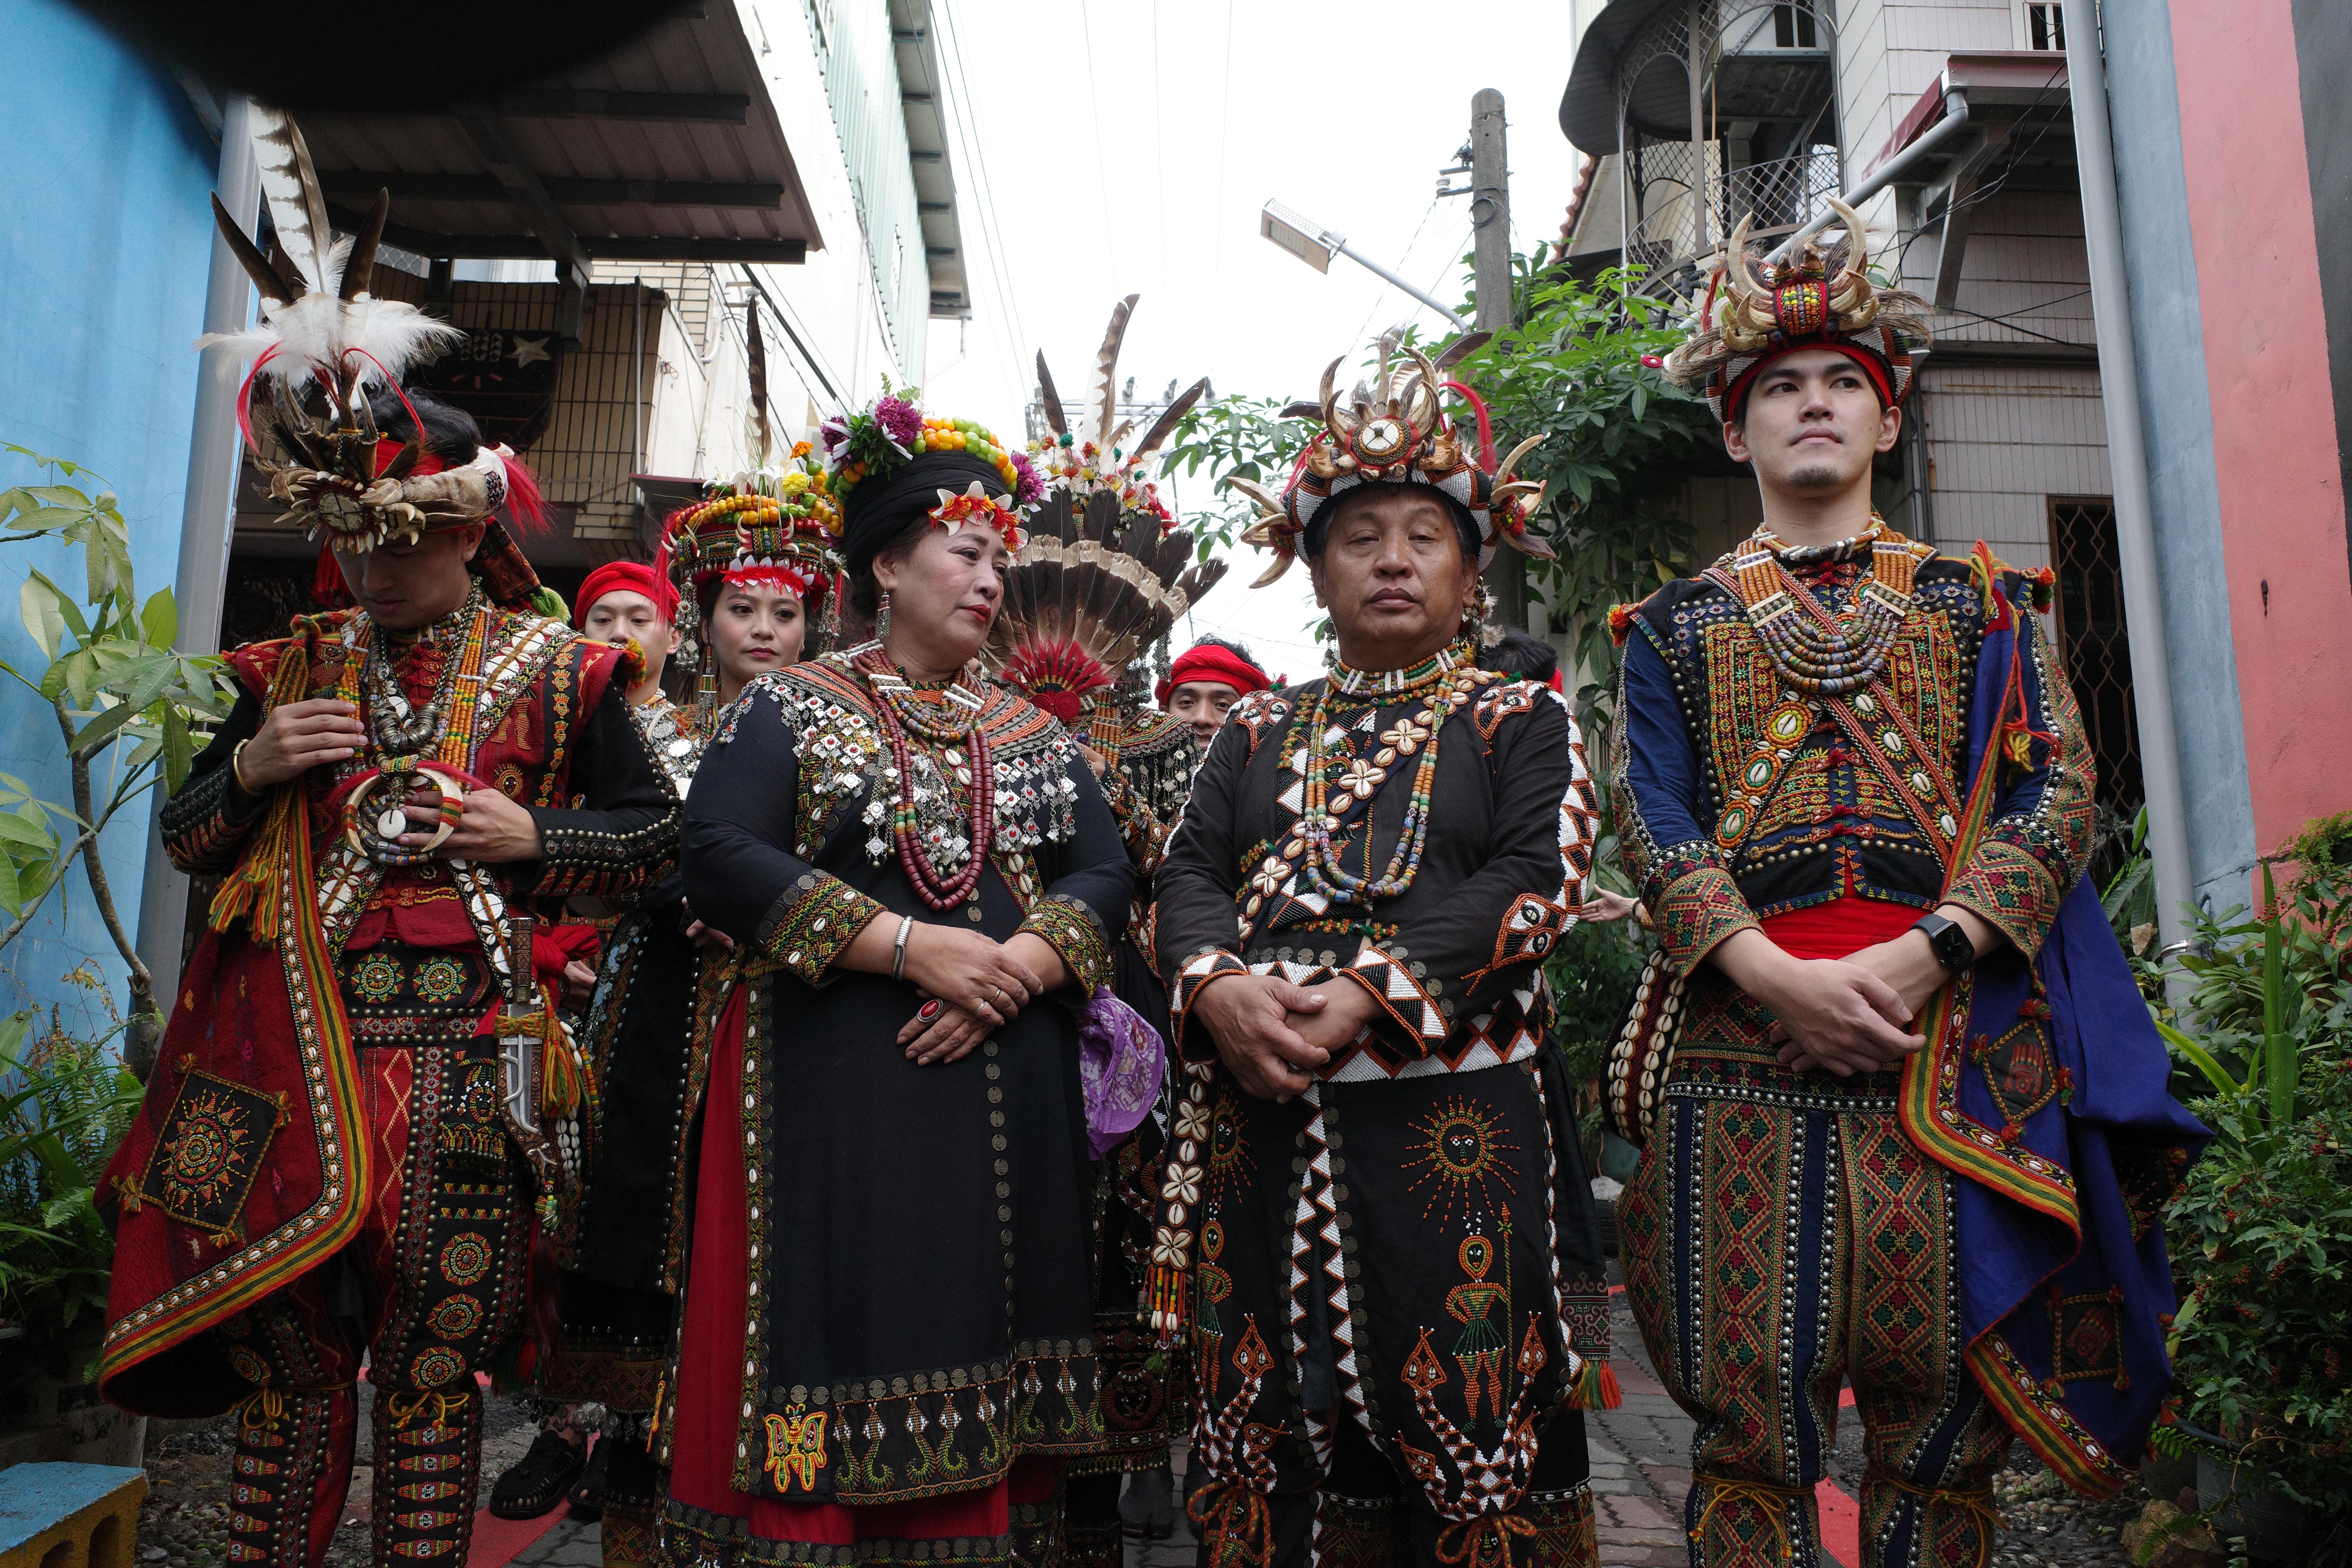 Members of the Paiwan tribe attend a wedding ceremony in Pingtung, Taiwan, in December 2020